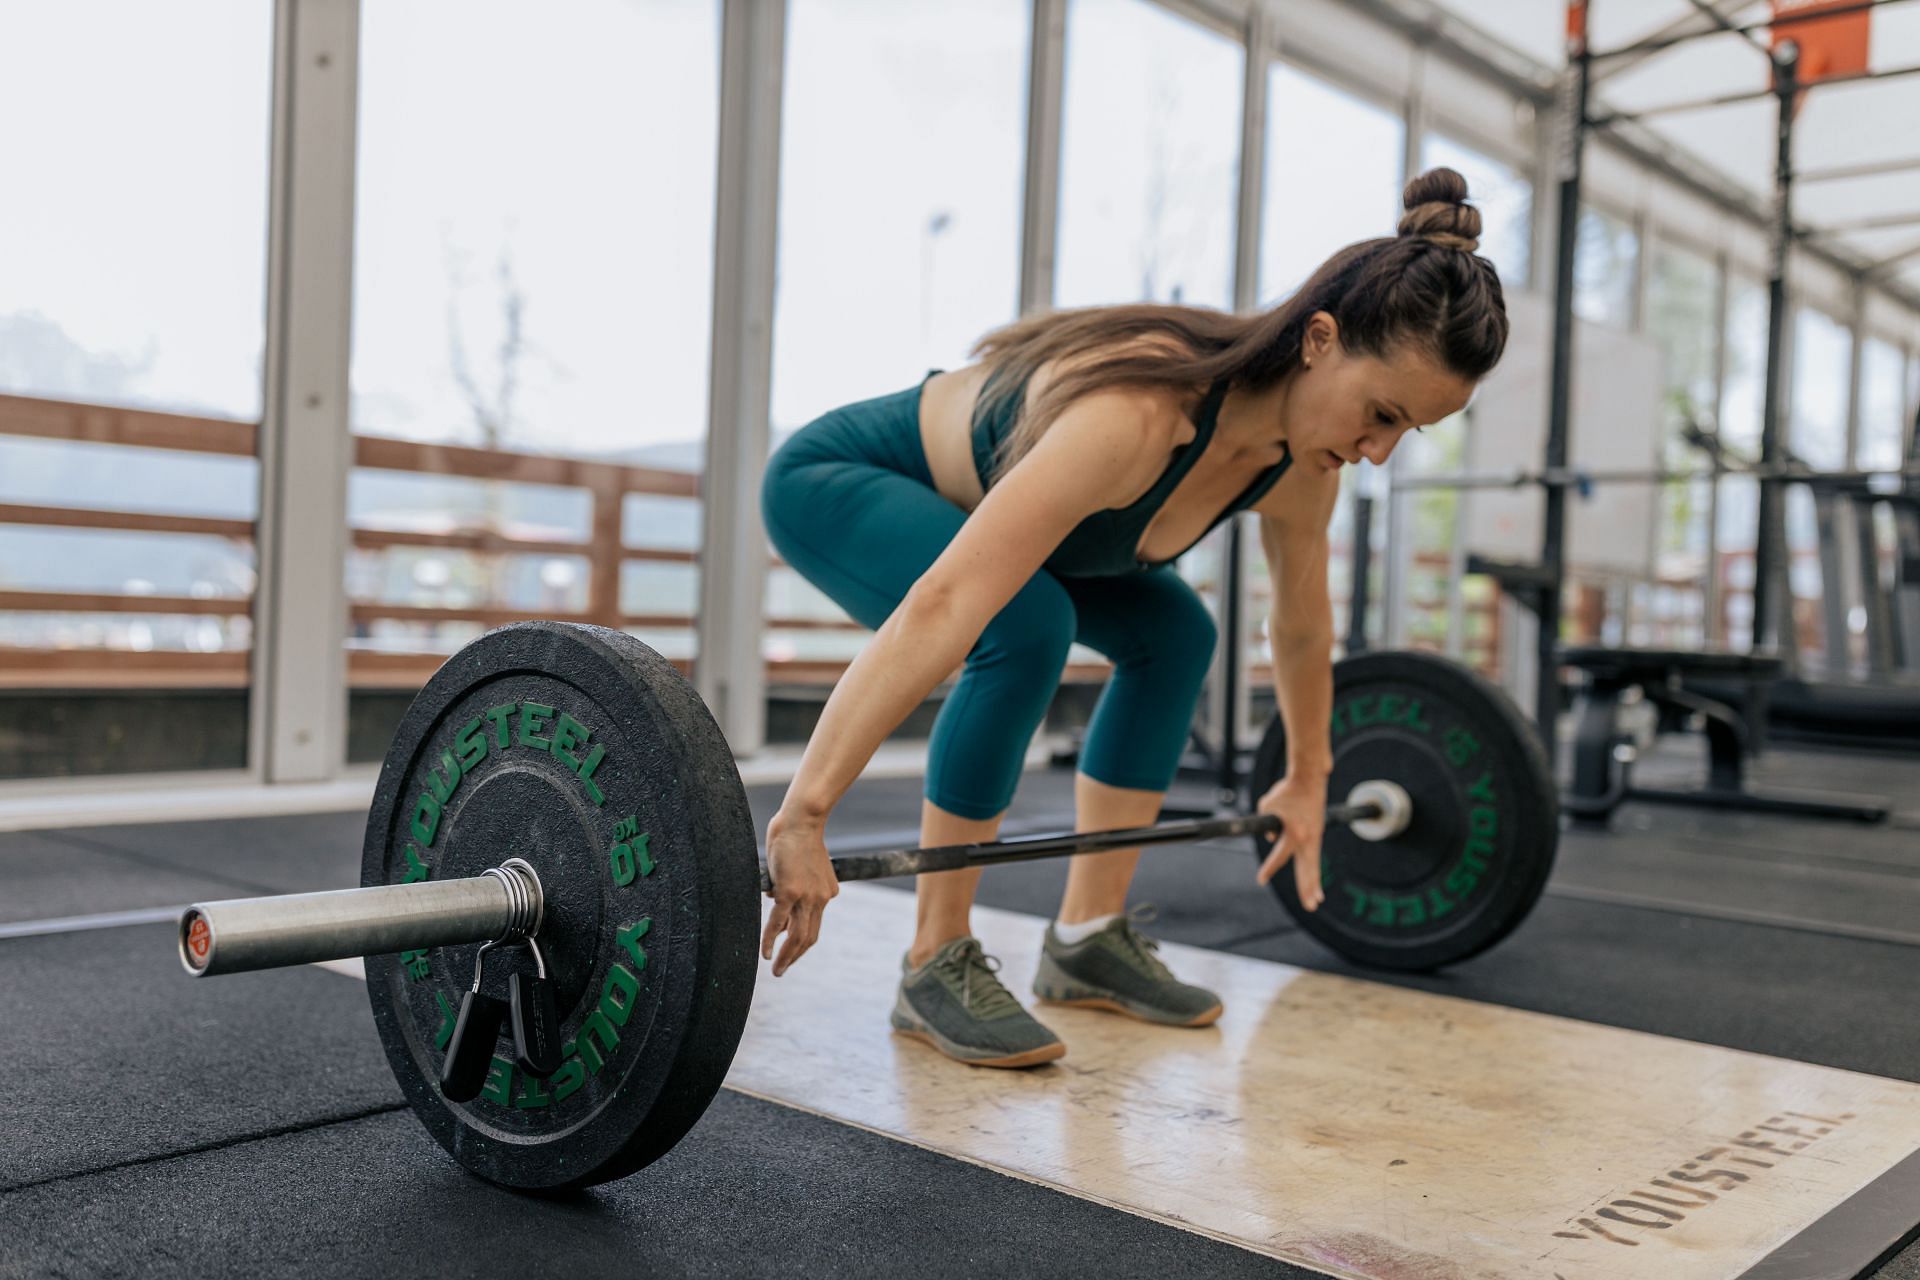 Underhand barbell row alternatives are a great option to spice up daily routine. (Image via Pexels/ Anaastasia Shuraeva)